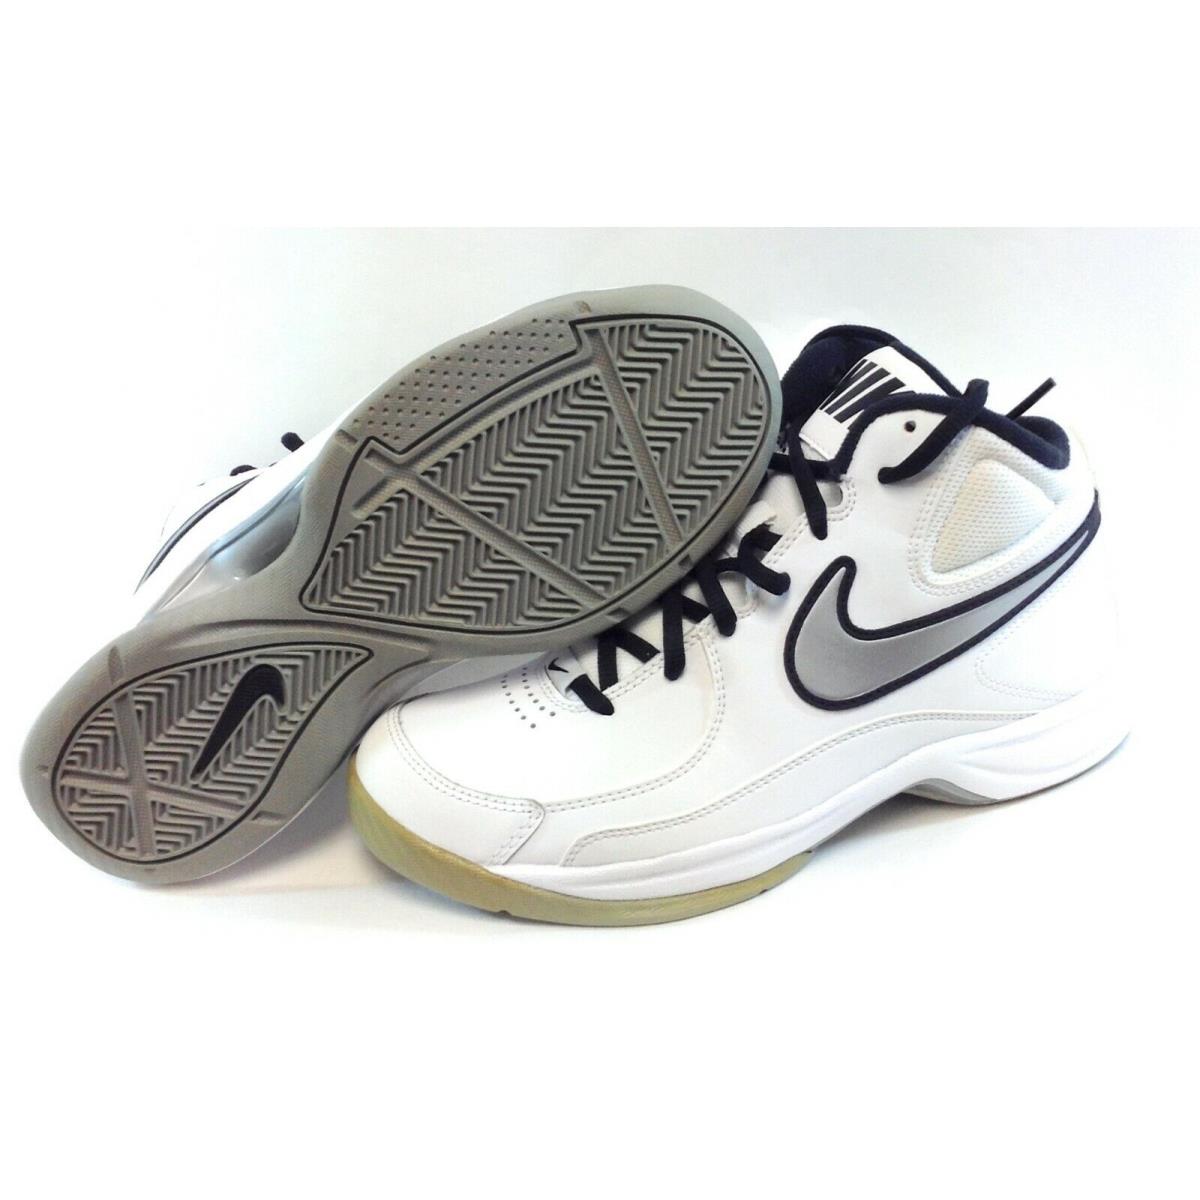 Womens Nike Overplay Vii 599426 100 White Silver 2013 Deadstock Sneakers Shoes